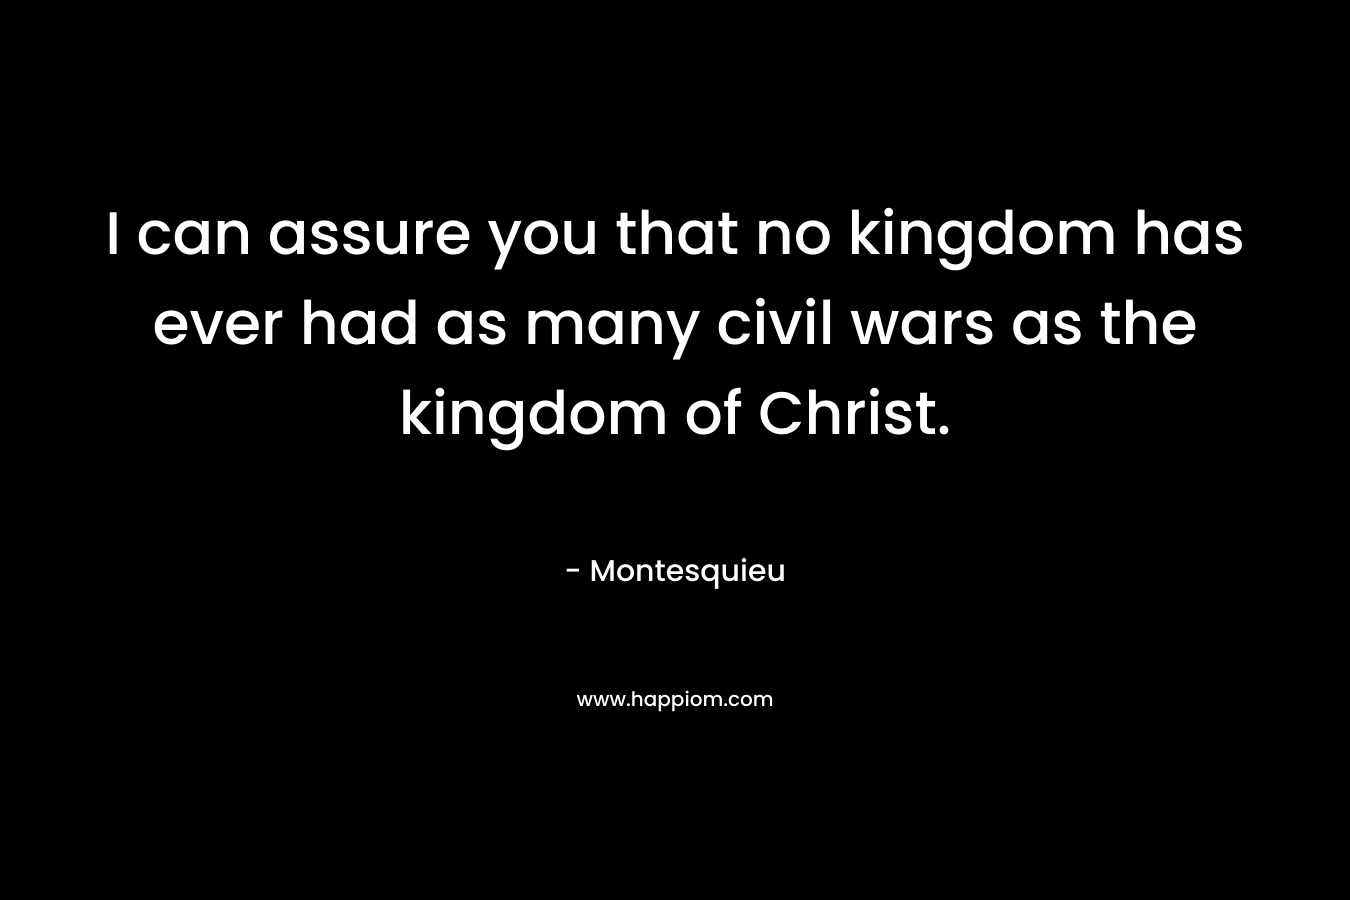 I can assure you that no kingdom has ever had as many civil wars as the kingdom of Christ.